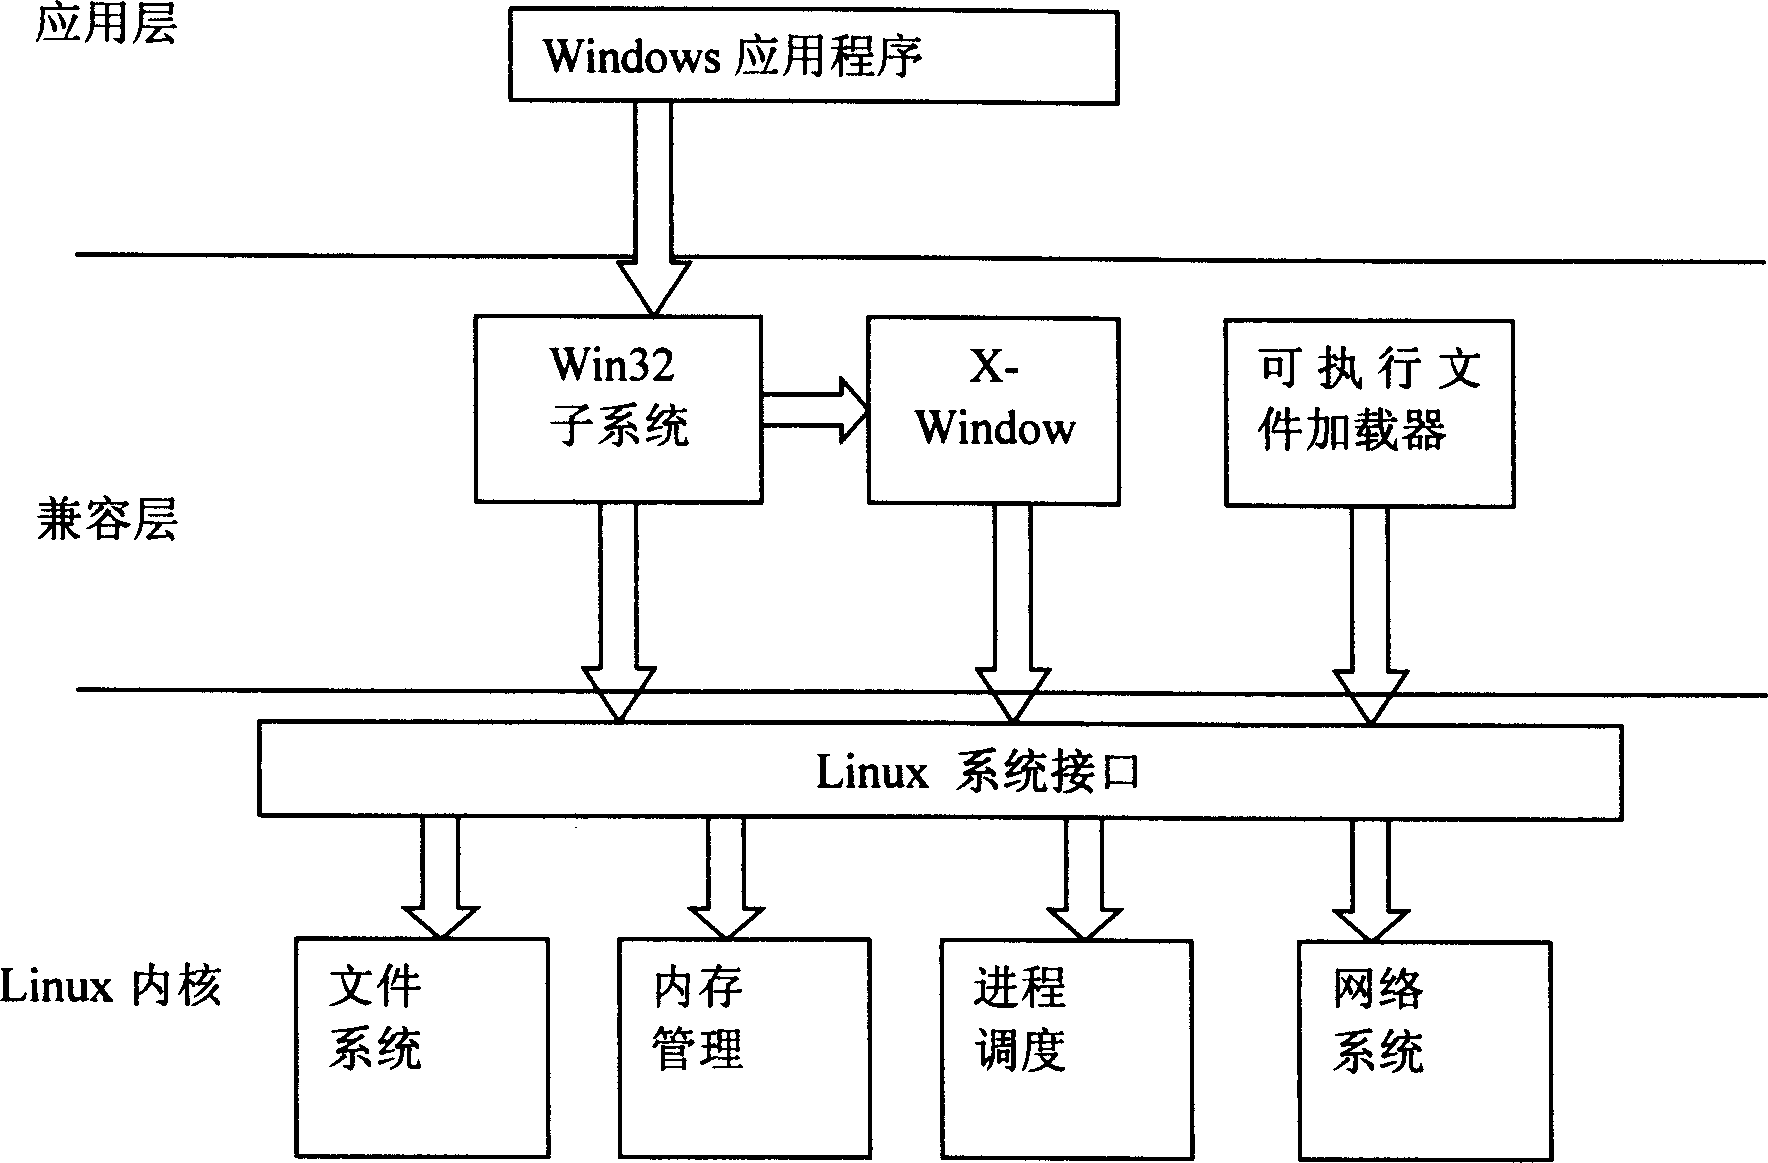 Linux-based Windows software compatible layer architecture